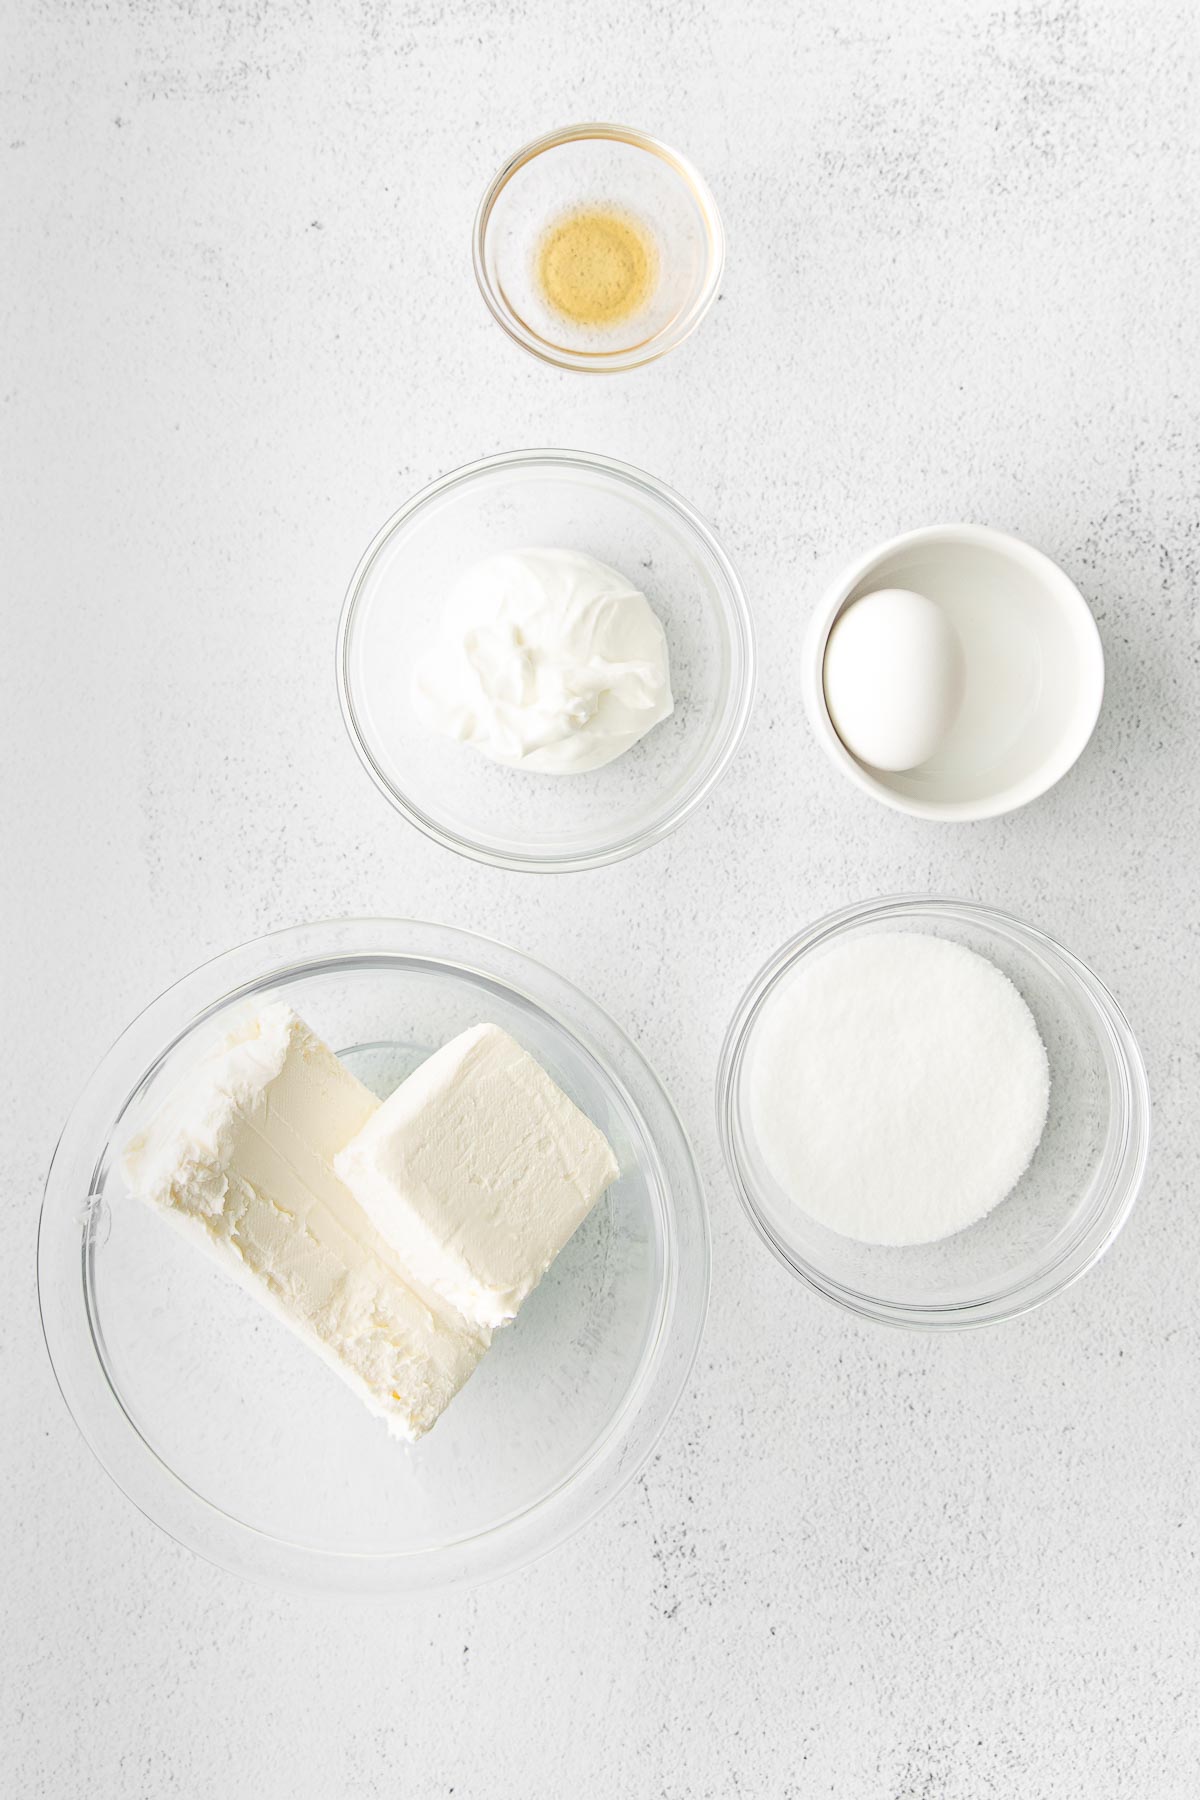 five glass bowls with ingredients for cheesecake filling - cream cheese, sugar, vanilla extract, sour cream and one egg